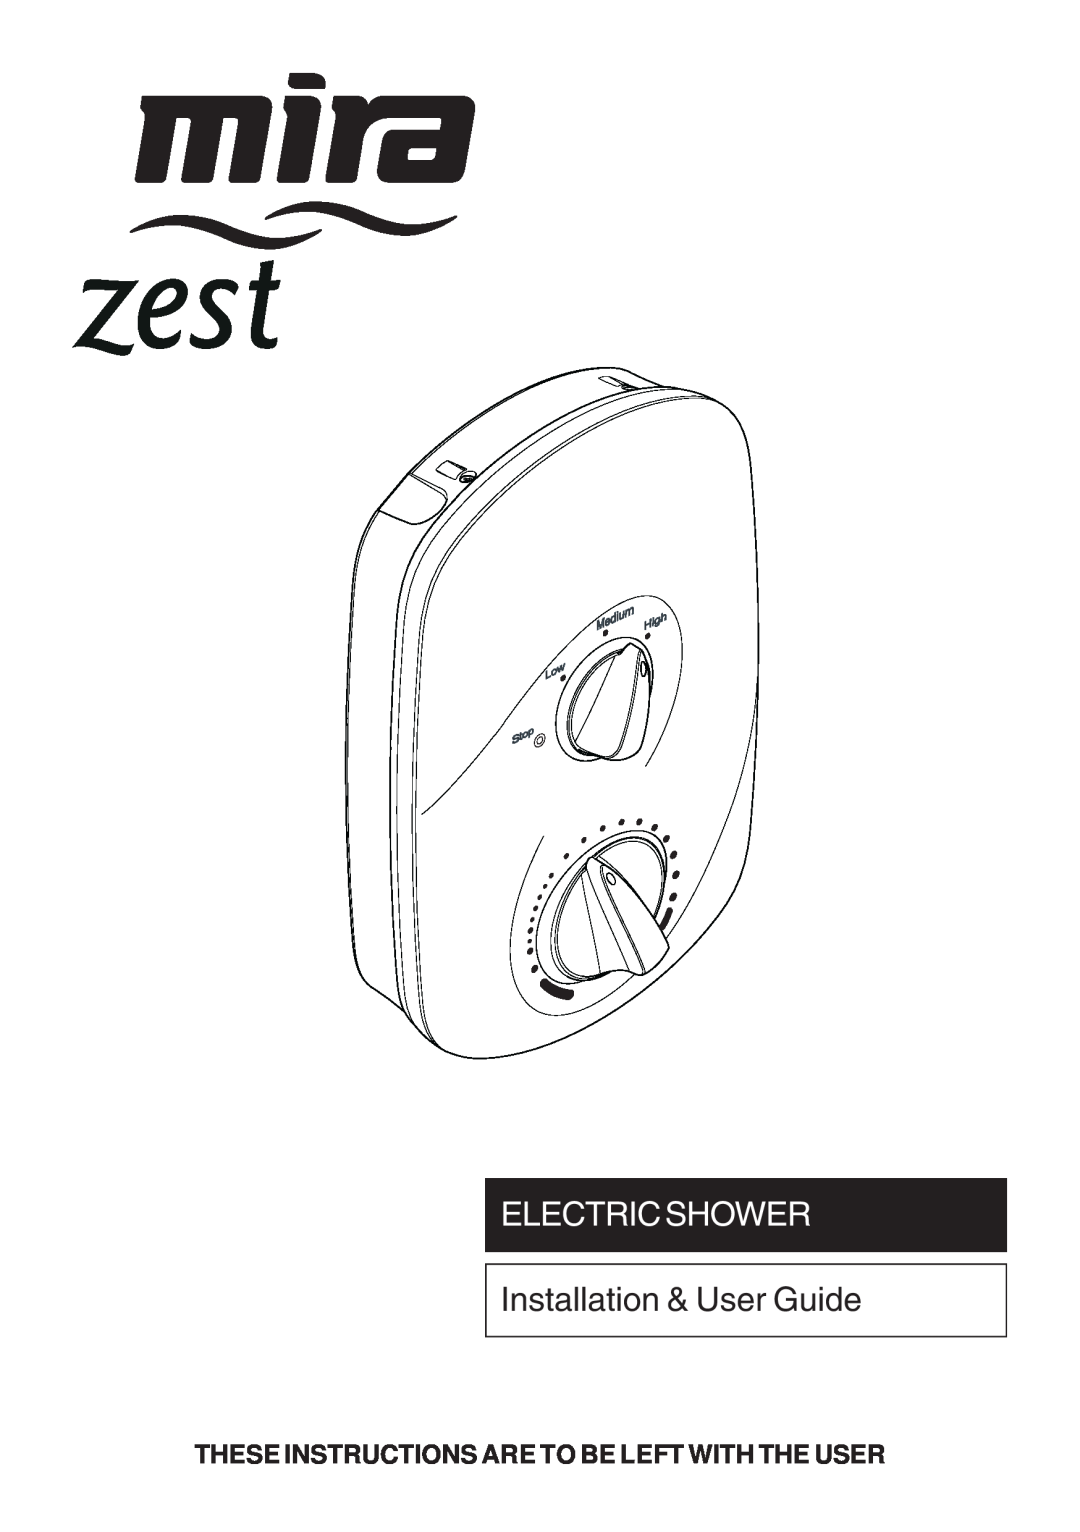 Kohler Electric Shower manual These Instructions Are To Be Left With The User, Electricshower, Installation & User Guide 